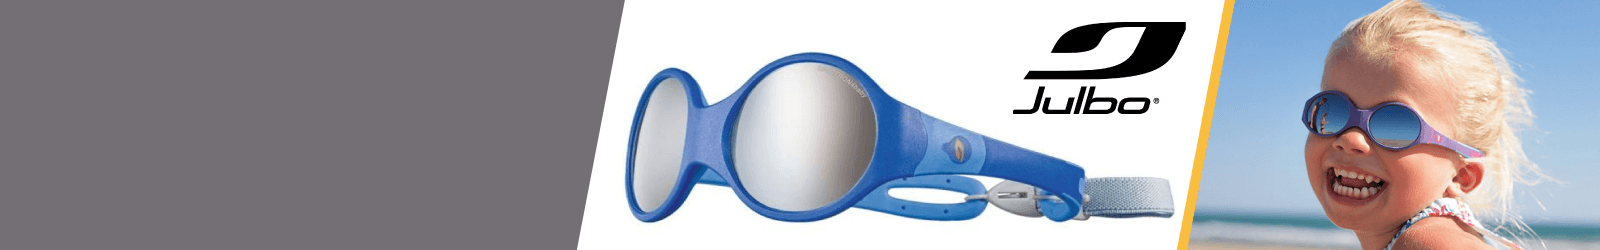 Julbo Kids Sunglasses from 11 to 13-year-old